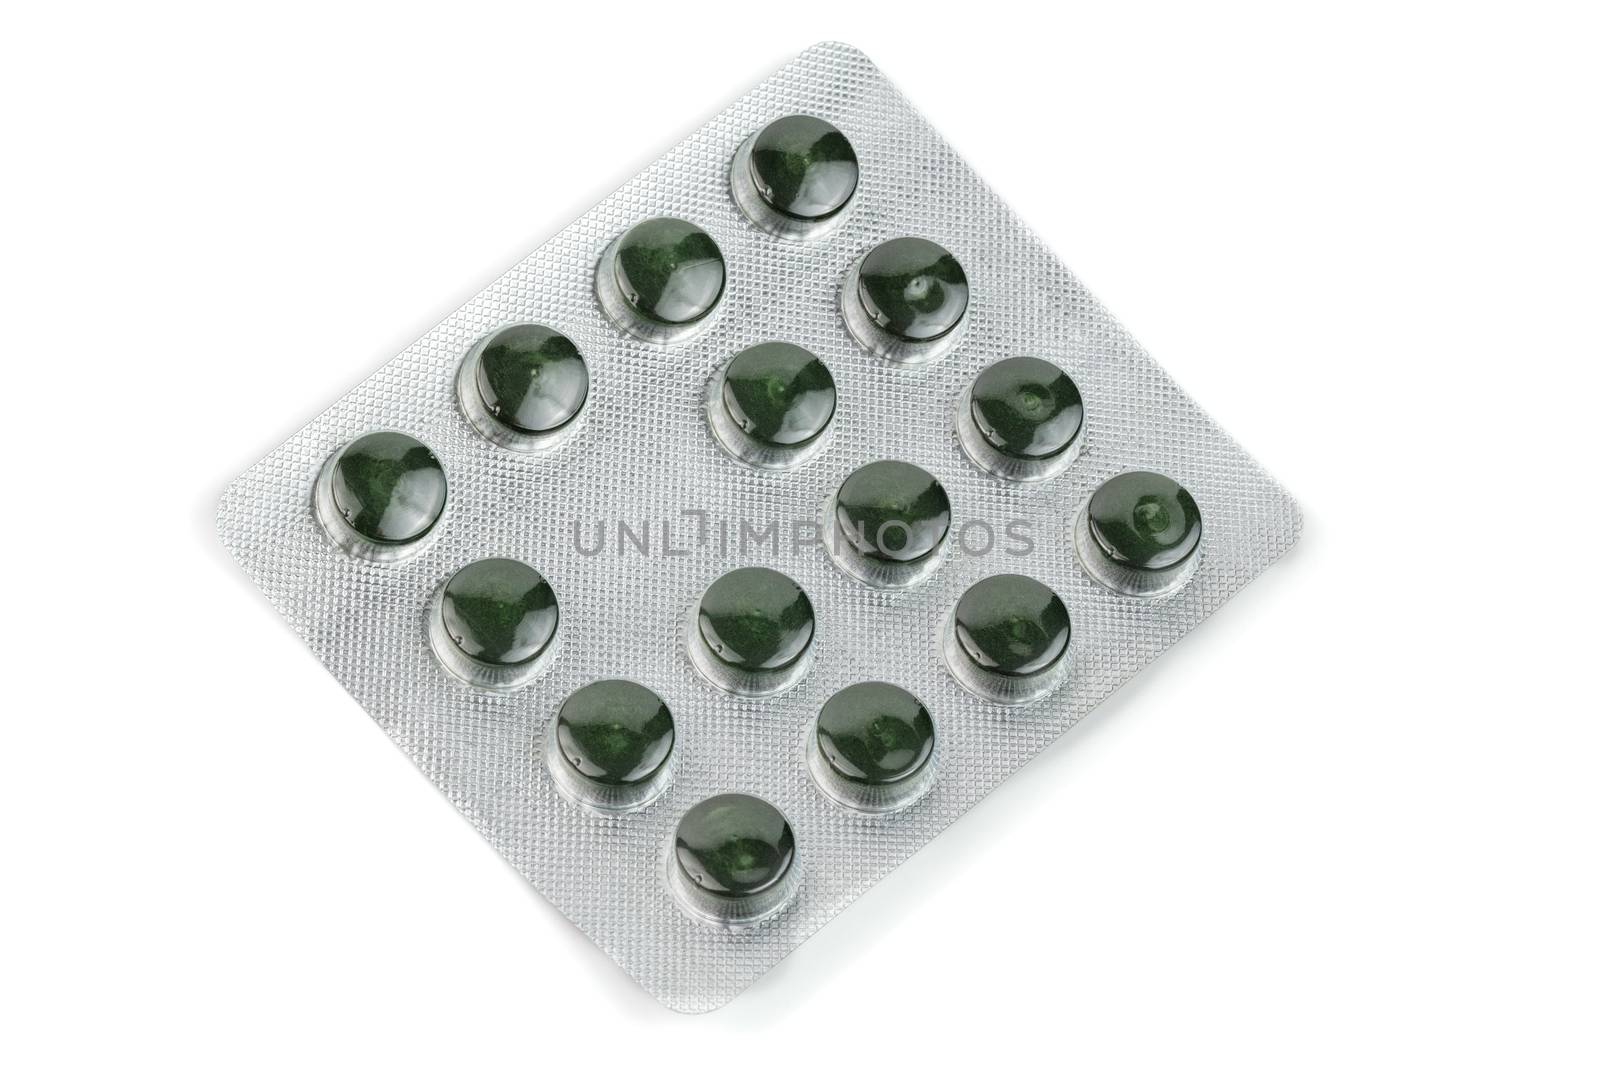 blister pack of green spirulina pills isolated on white background by z1b